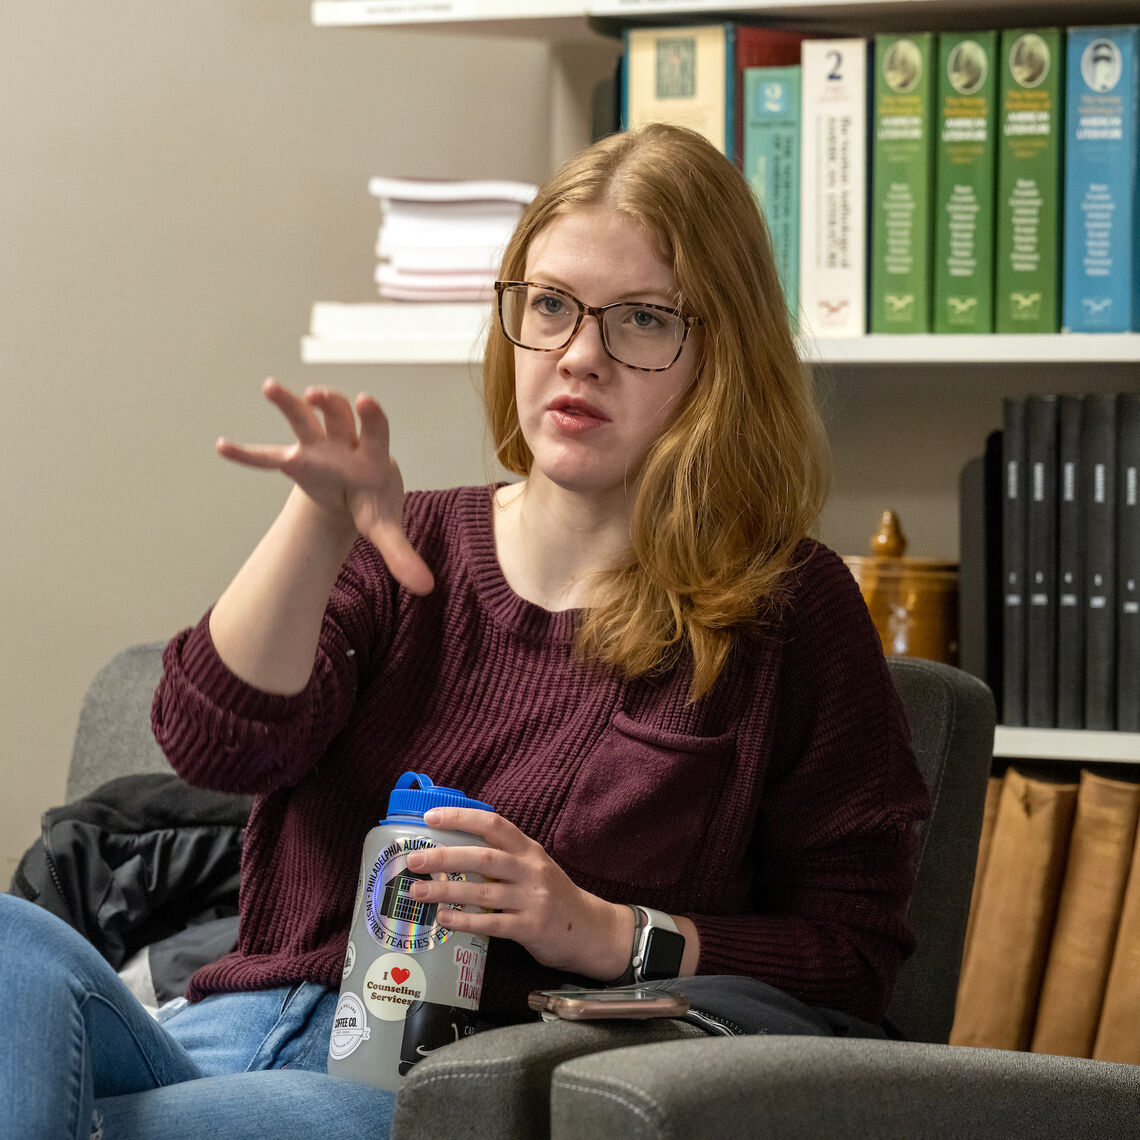 "It is so special to watch how the festival brings the campus community together every spring," says Mariel Paces Carter '23, member of the Emerging Writers Festival planning committee,